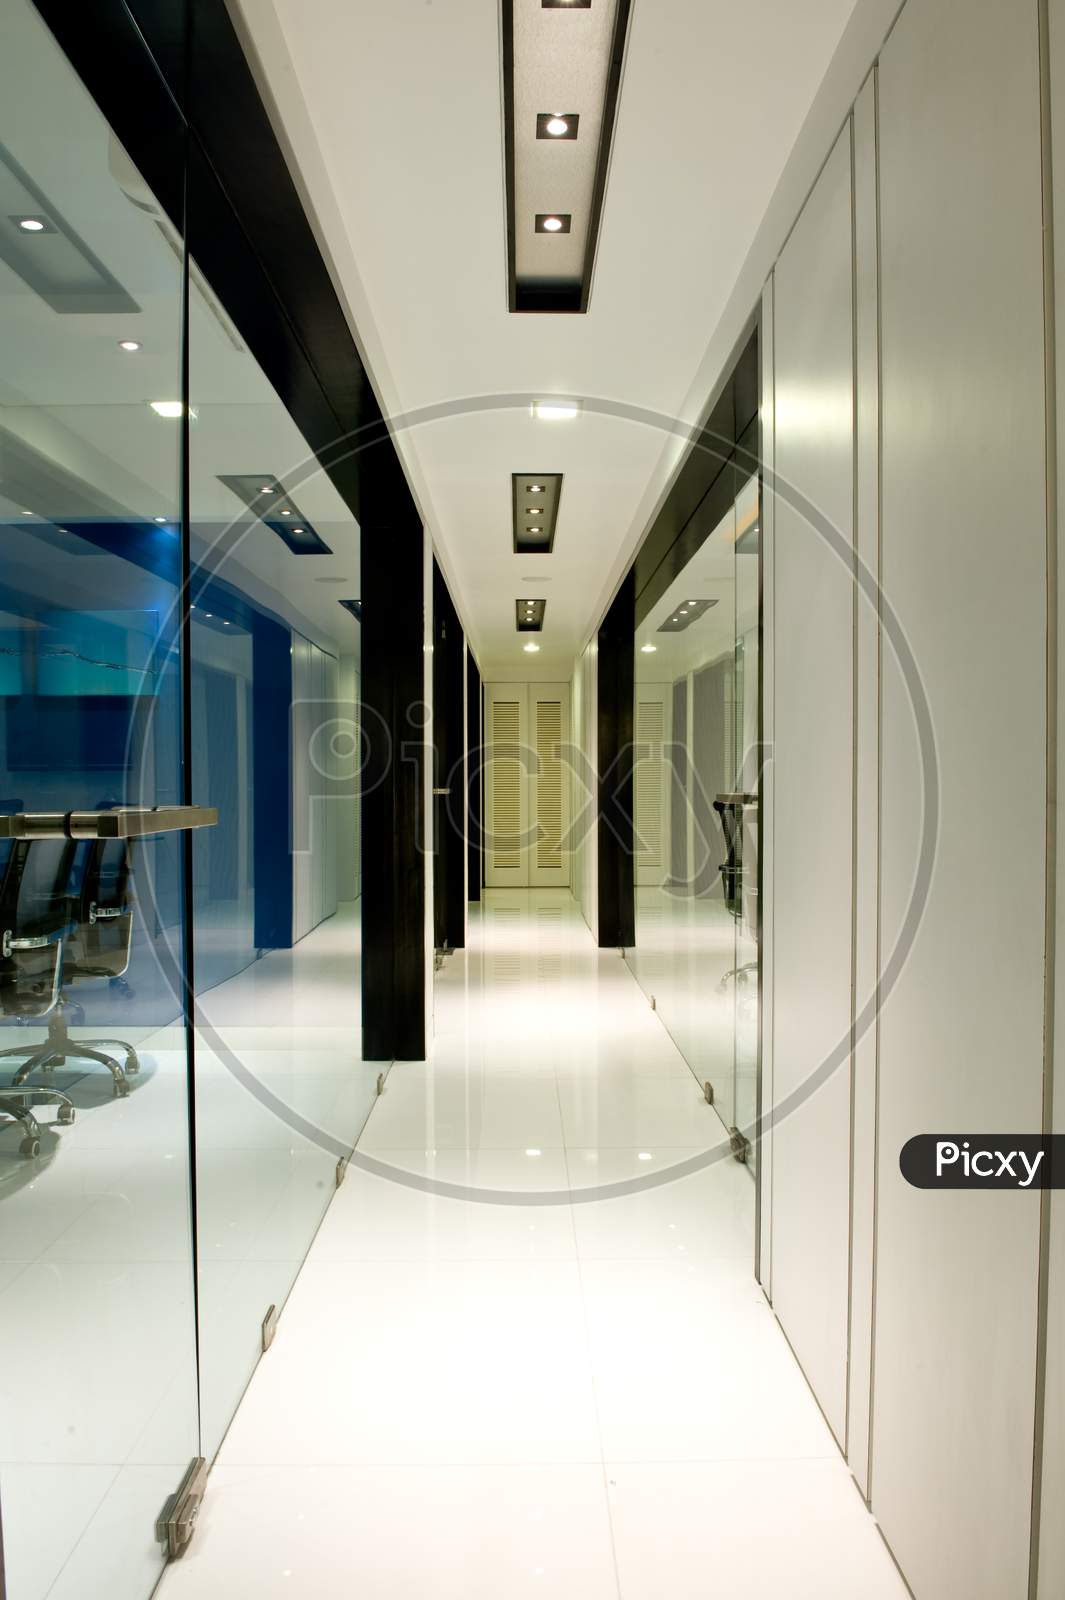 Corridors In an Office With Glass Shields